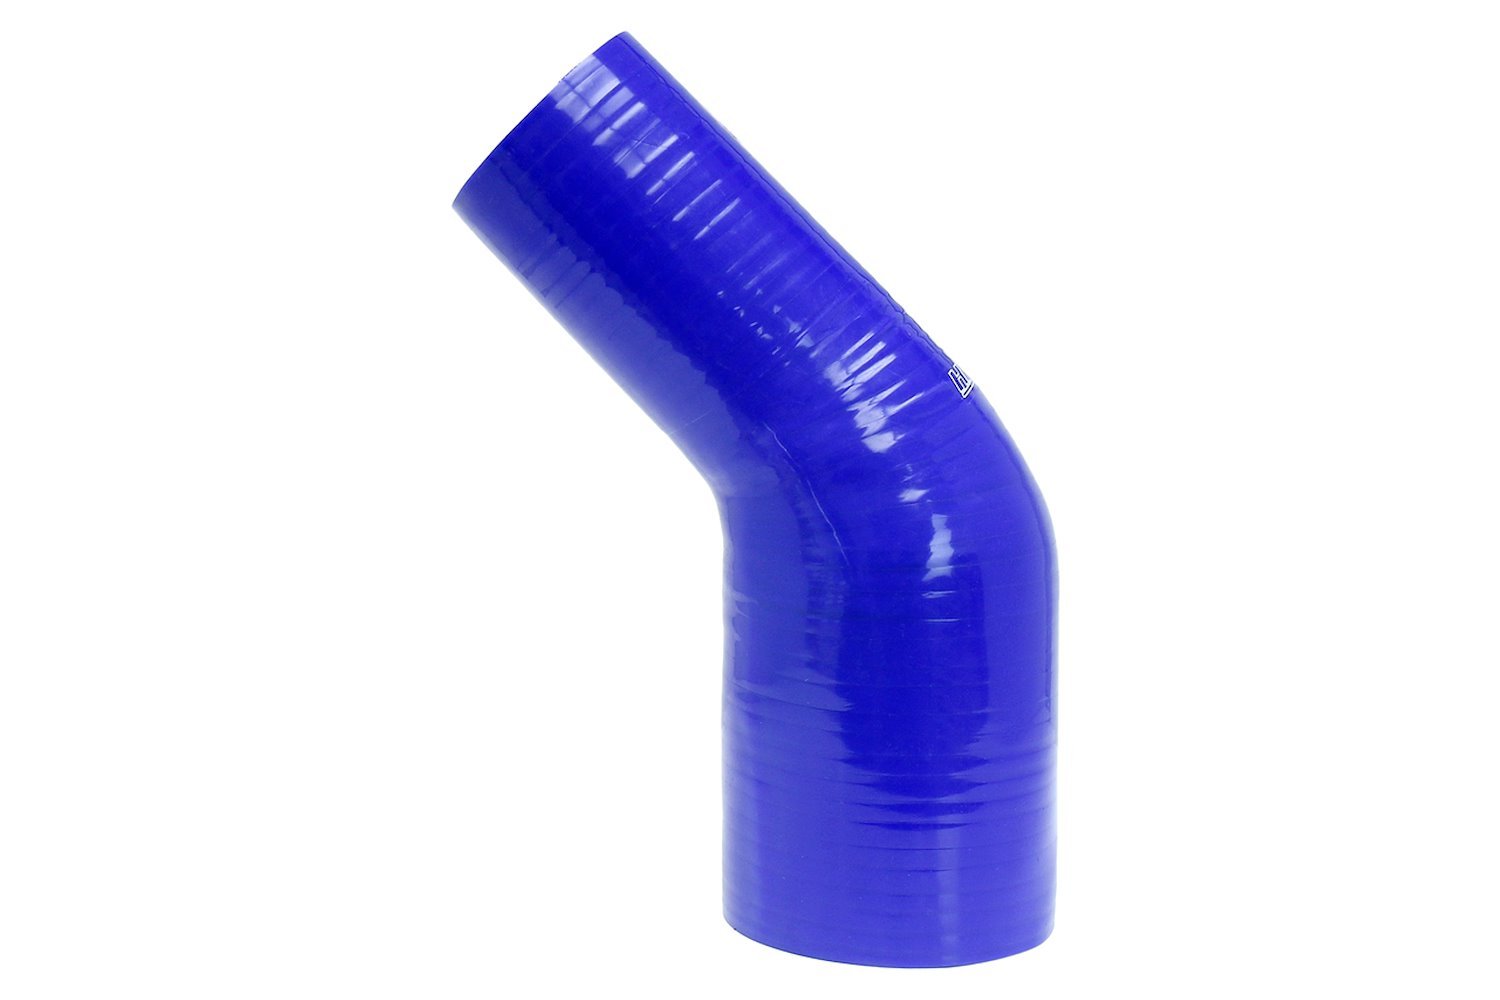 HTSER45-300-400-BLUE Silicone 45-Degree Elbow Hose, High-Temp 4-Ply Reinforced, 3 in. - 4 in. ID, Blue